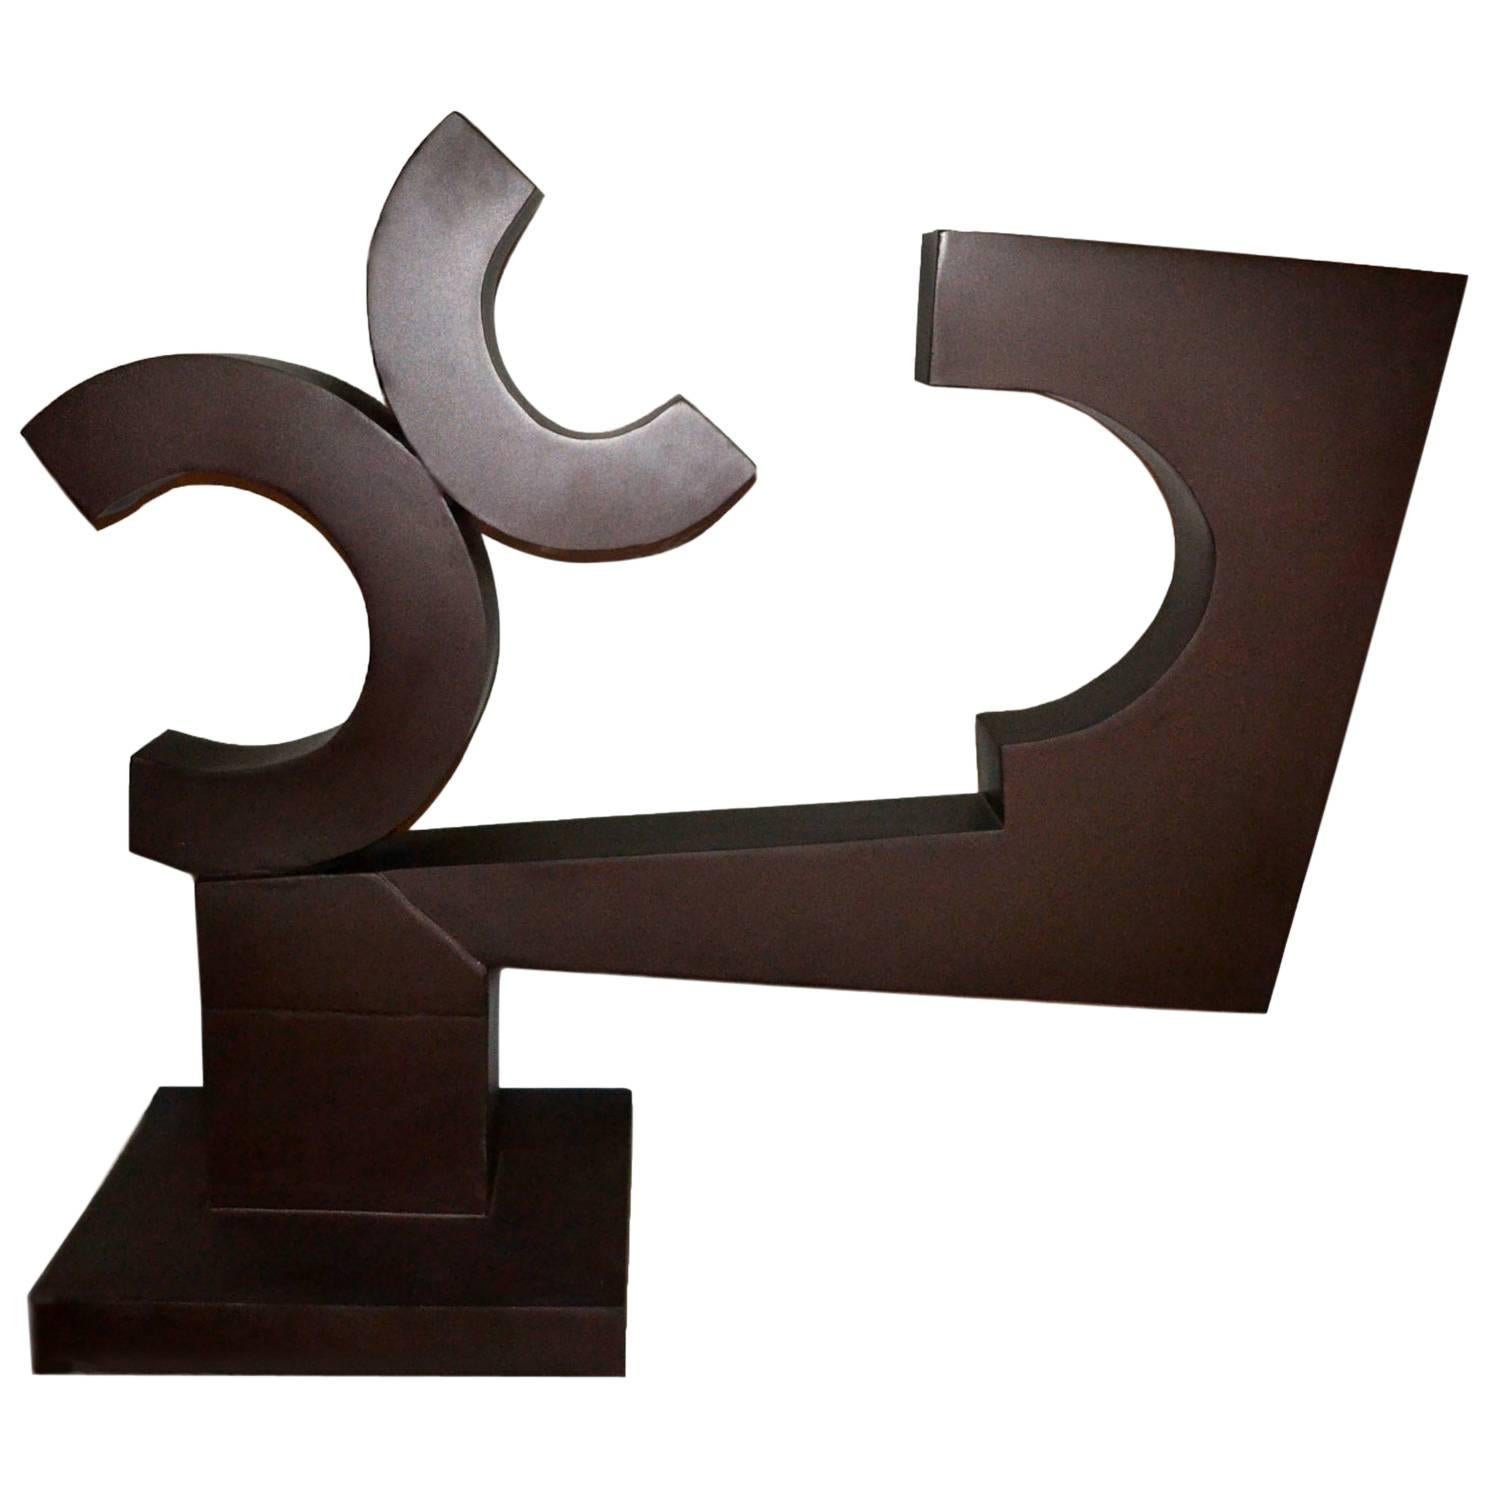 Abstract Steel Sculpture Titled "Runaway Cs" by Moira Fain For Sale